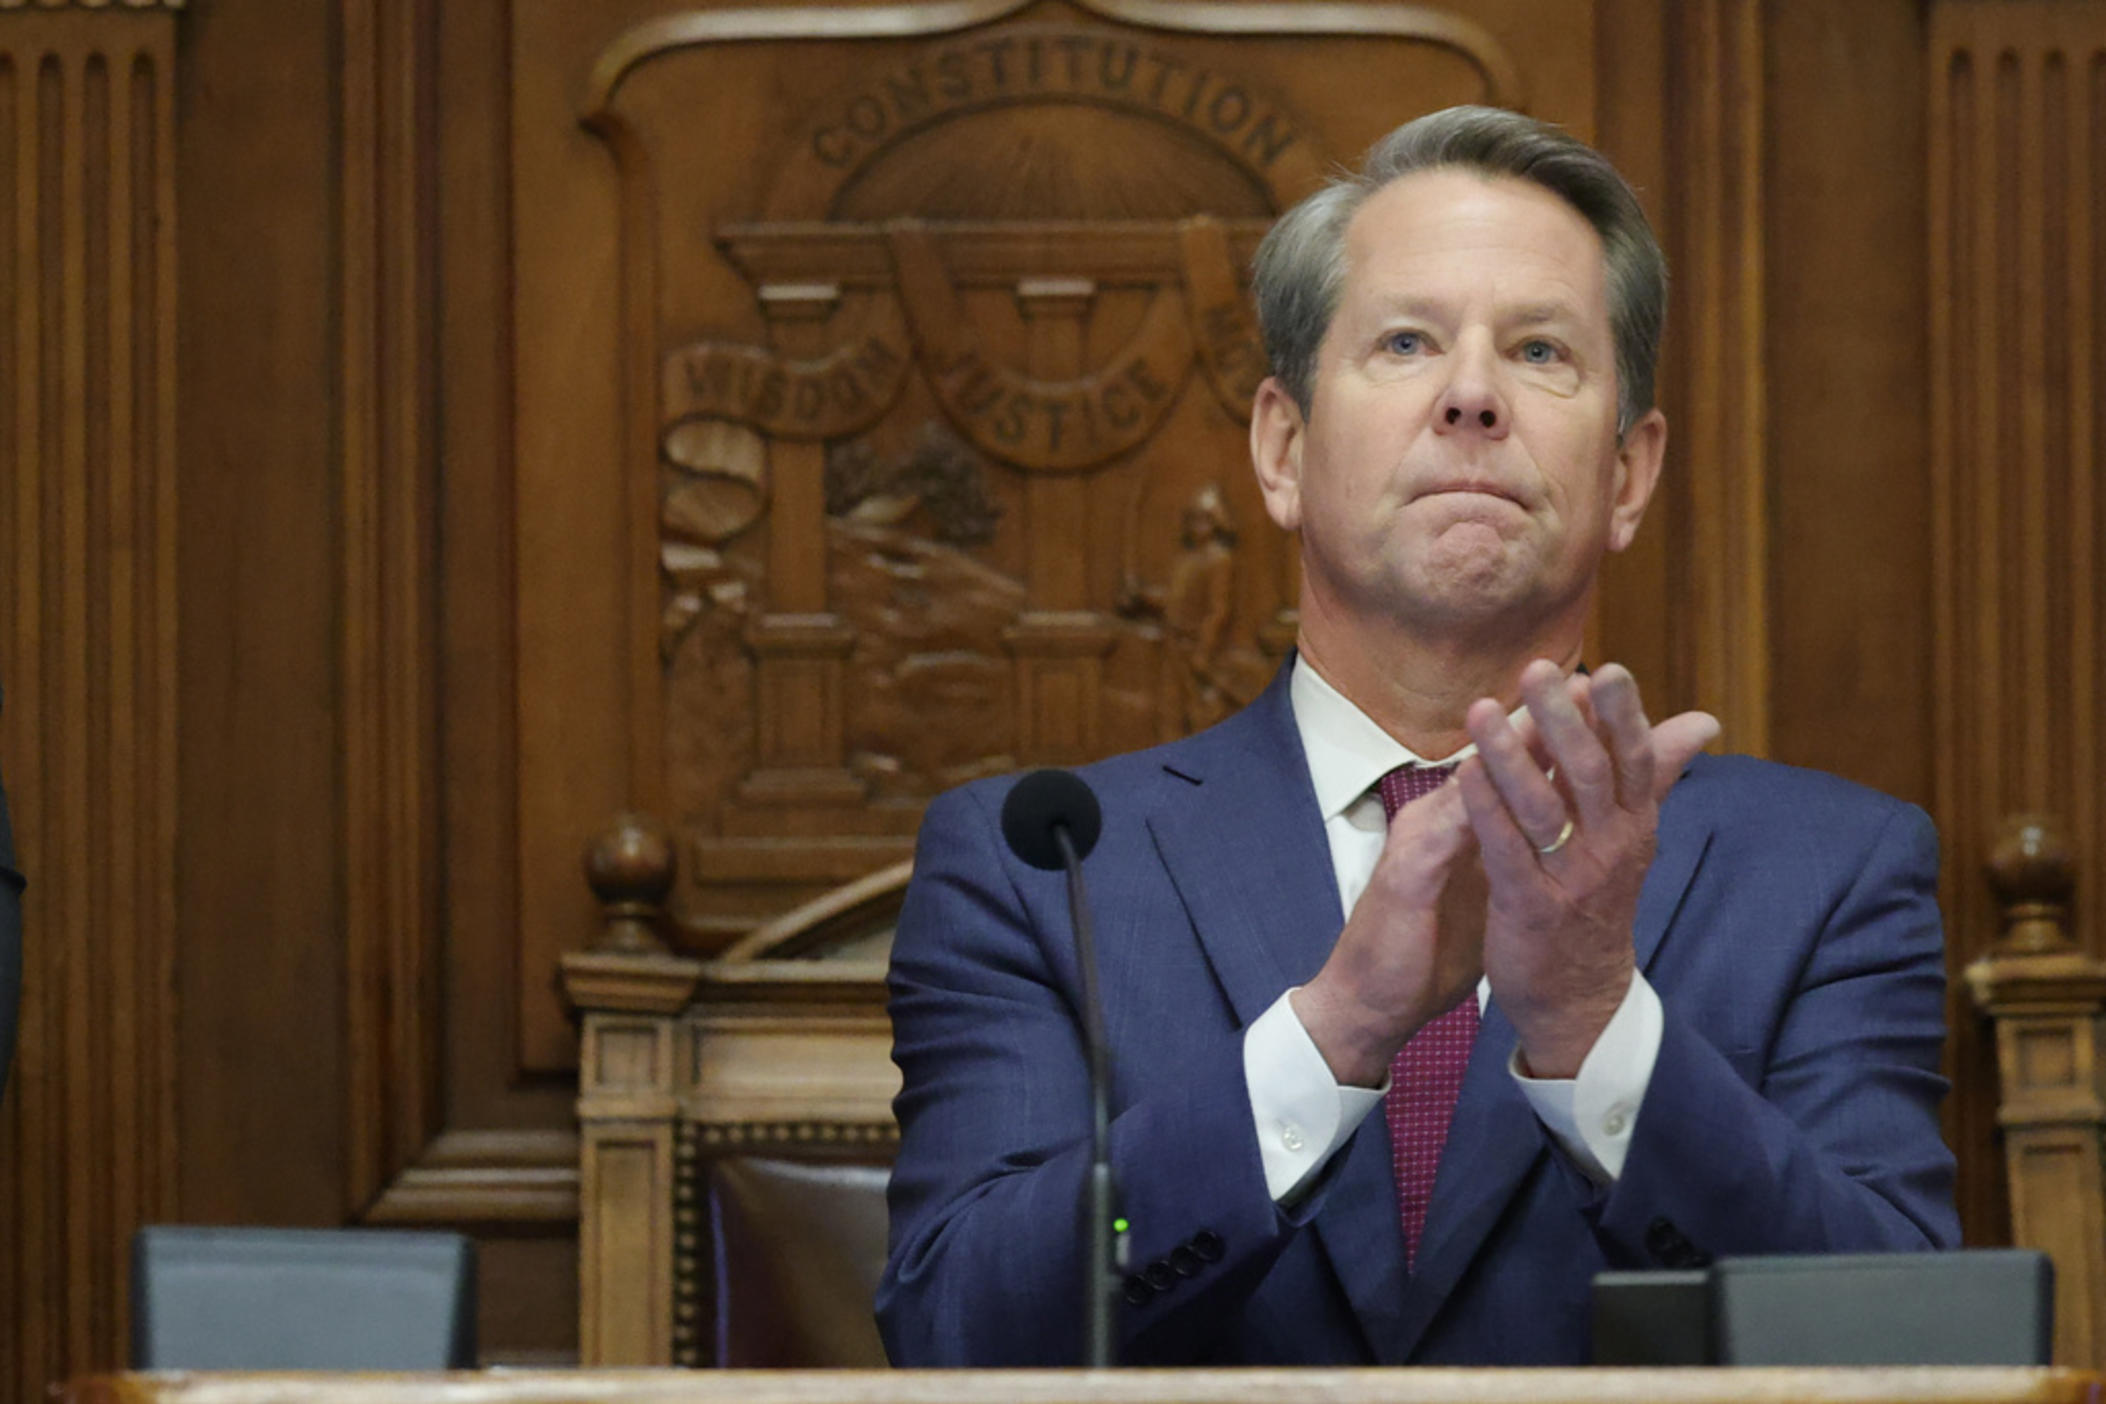 Georgia Gov. Brian Kemp delivers the State of the State address at the state Capitol on Wednesday, Jan. 25, 2023 in Atlanta. The Republican Kemp announced on Wednesday, Aug. 2, 2023 that state agencies can ask lawmakers to increase spending by 3% in upcoming budgets.